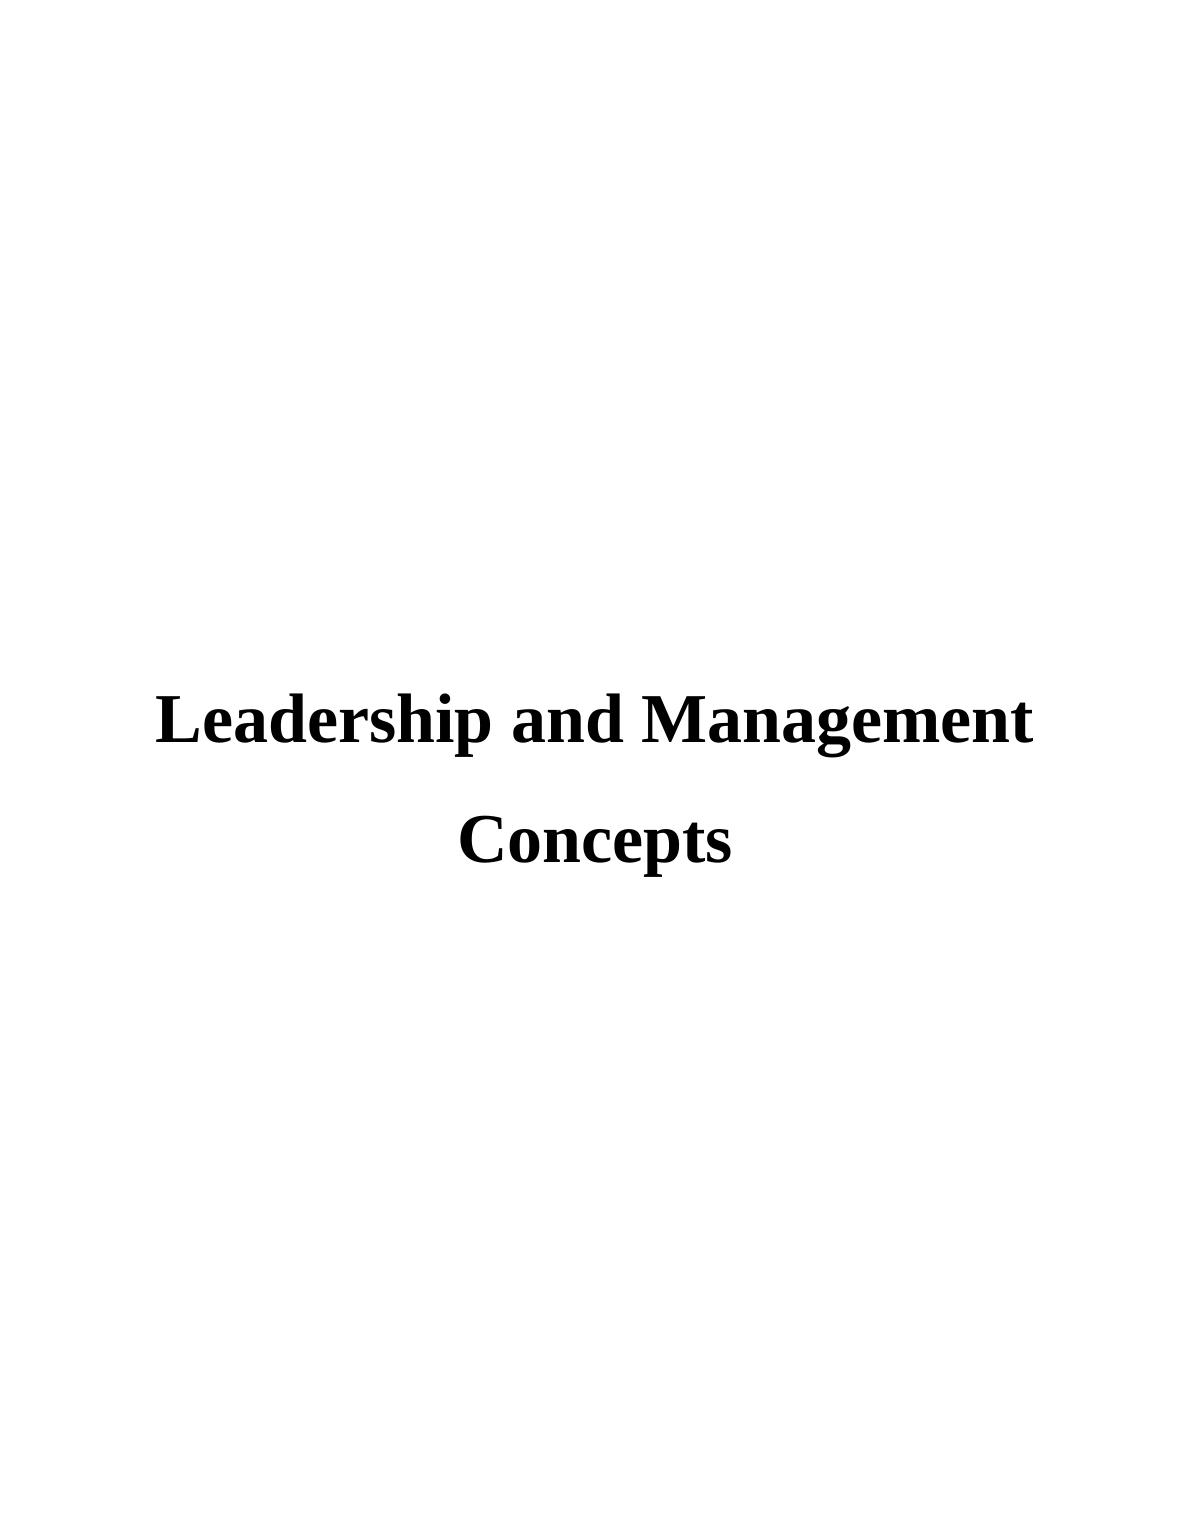 Leadership and Management Concepts  Assignment_1